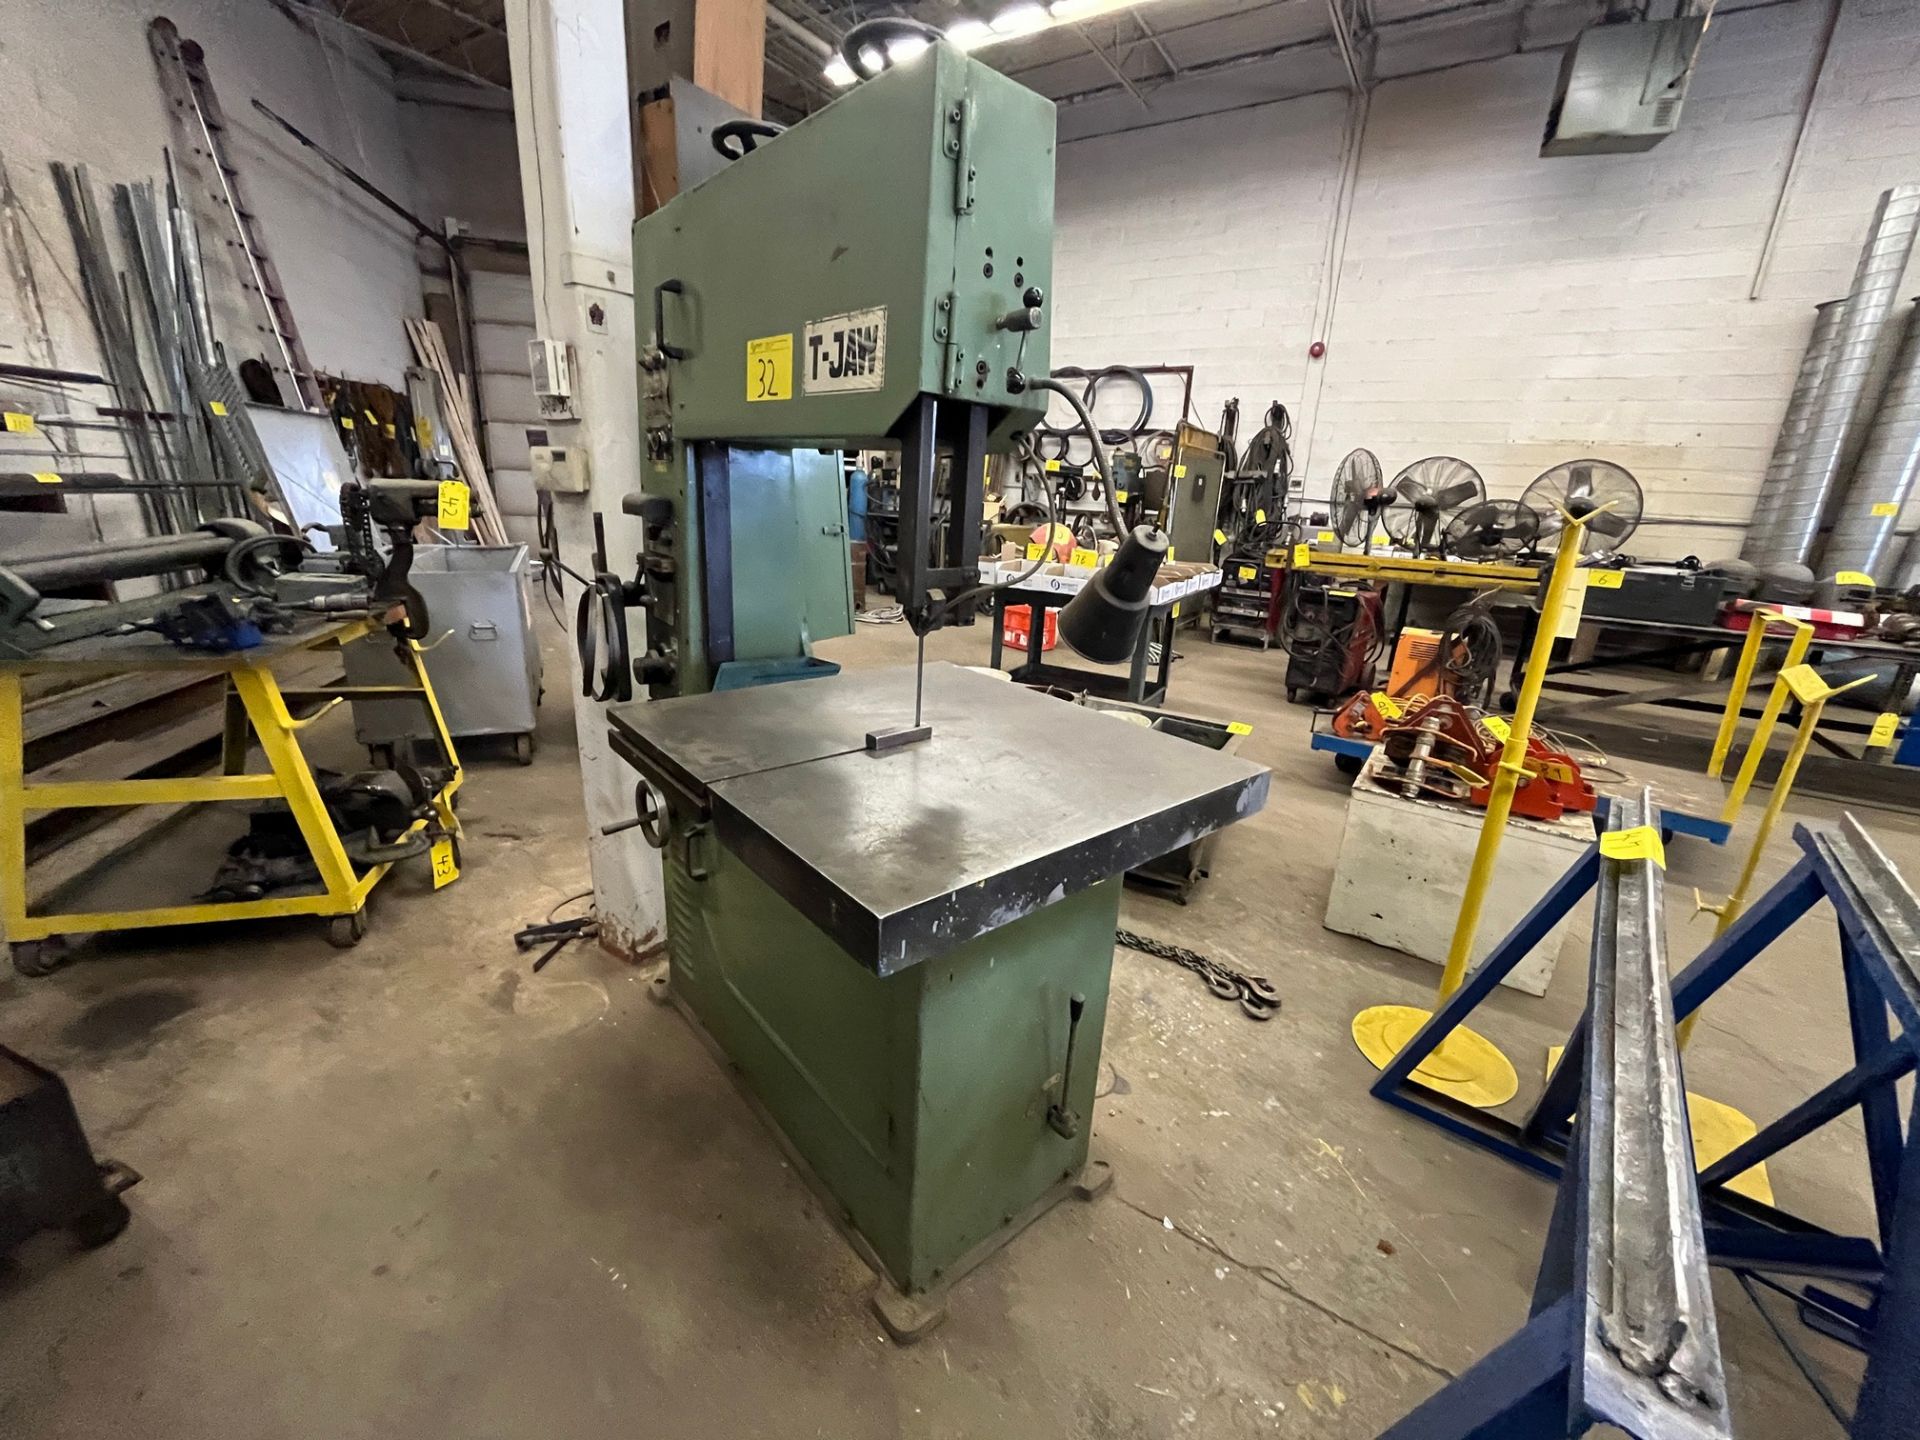 T-JAW T-500 VERTICAL BANDSAW, VARIABLE SPEED, 575V, 28" THROAT, 29" X 27" TABLE, BLADE WELDER, SPARE - Image 4 of 9